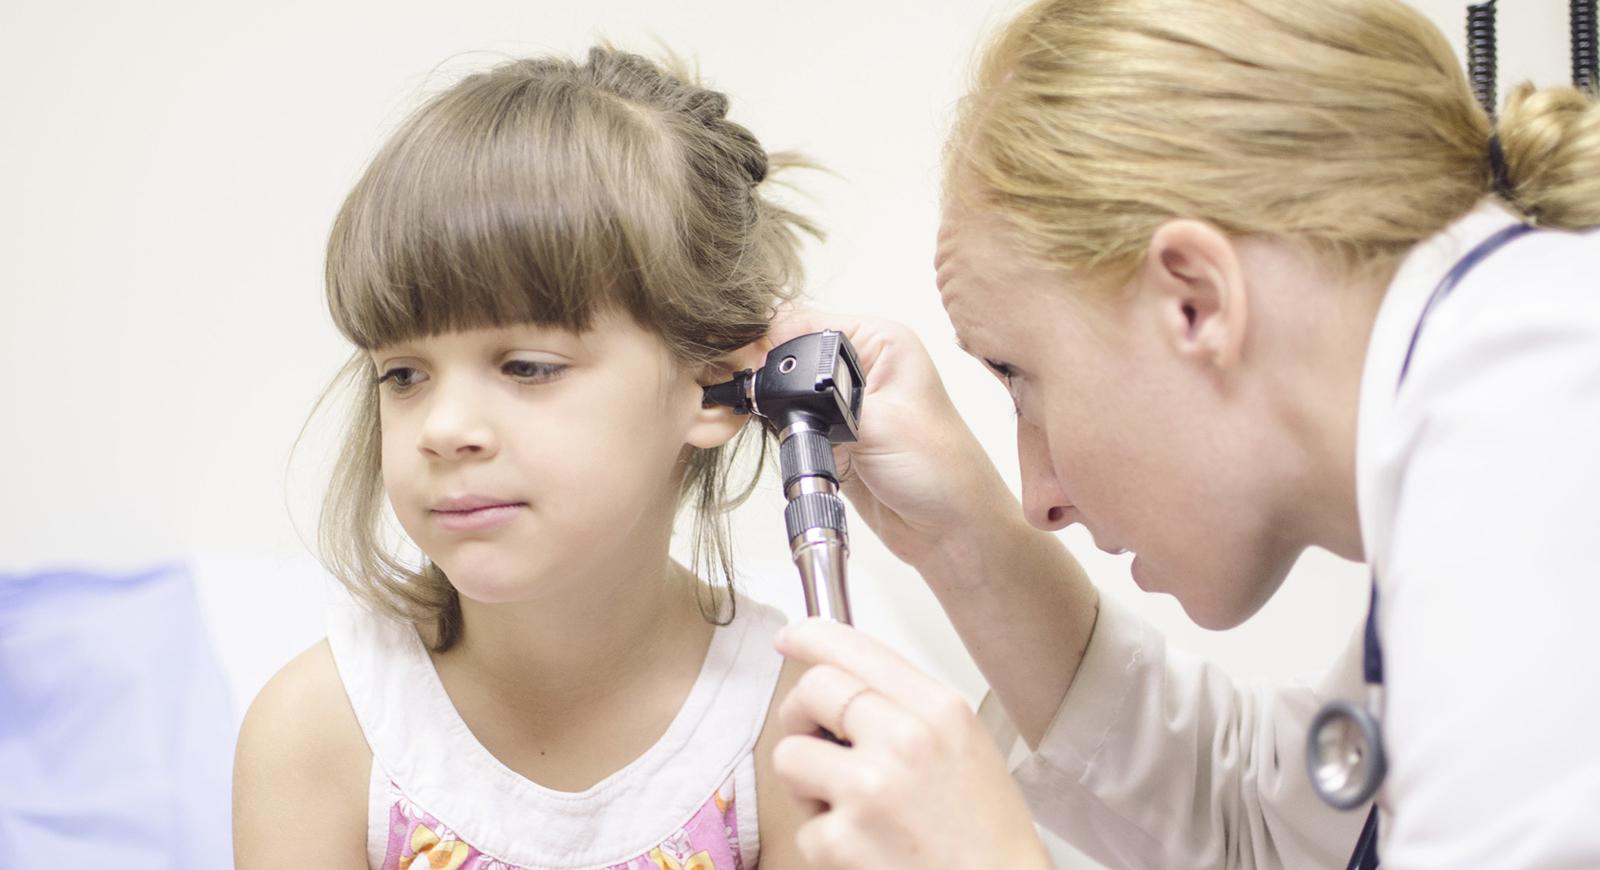 Photo of a medical professional in a white coat looks into a child's ear in an exam room.